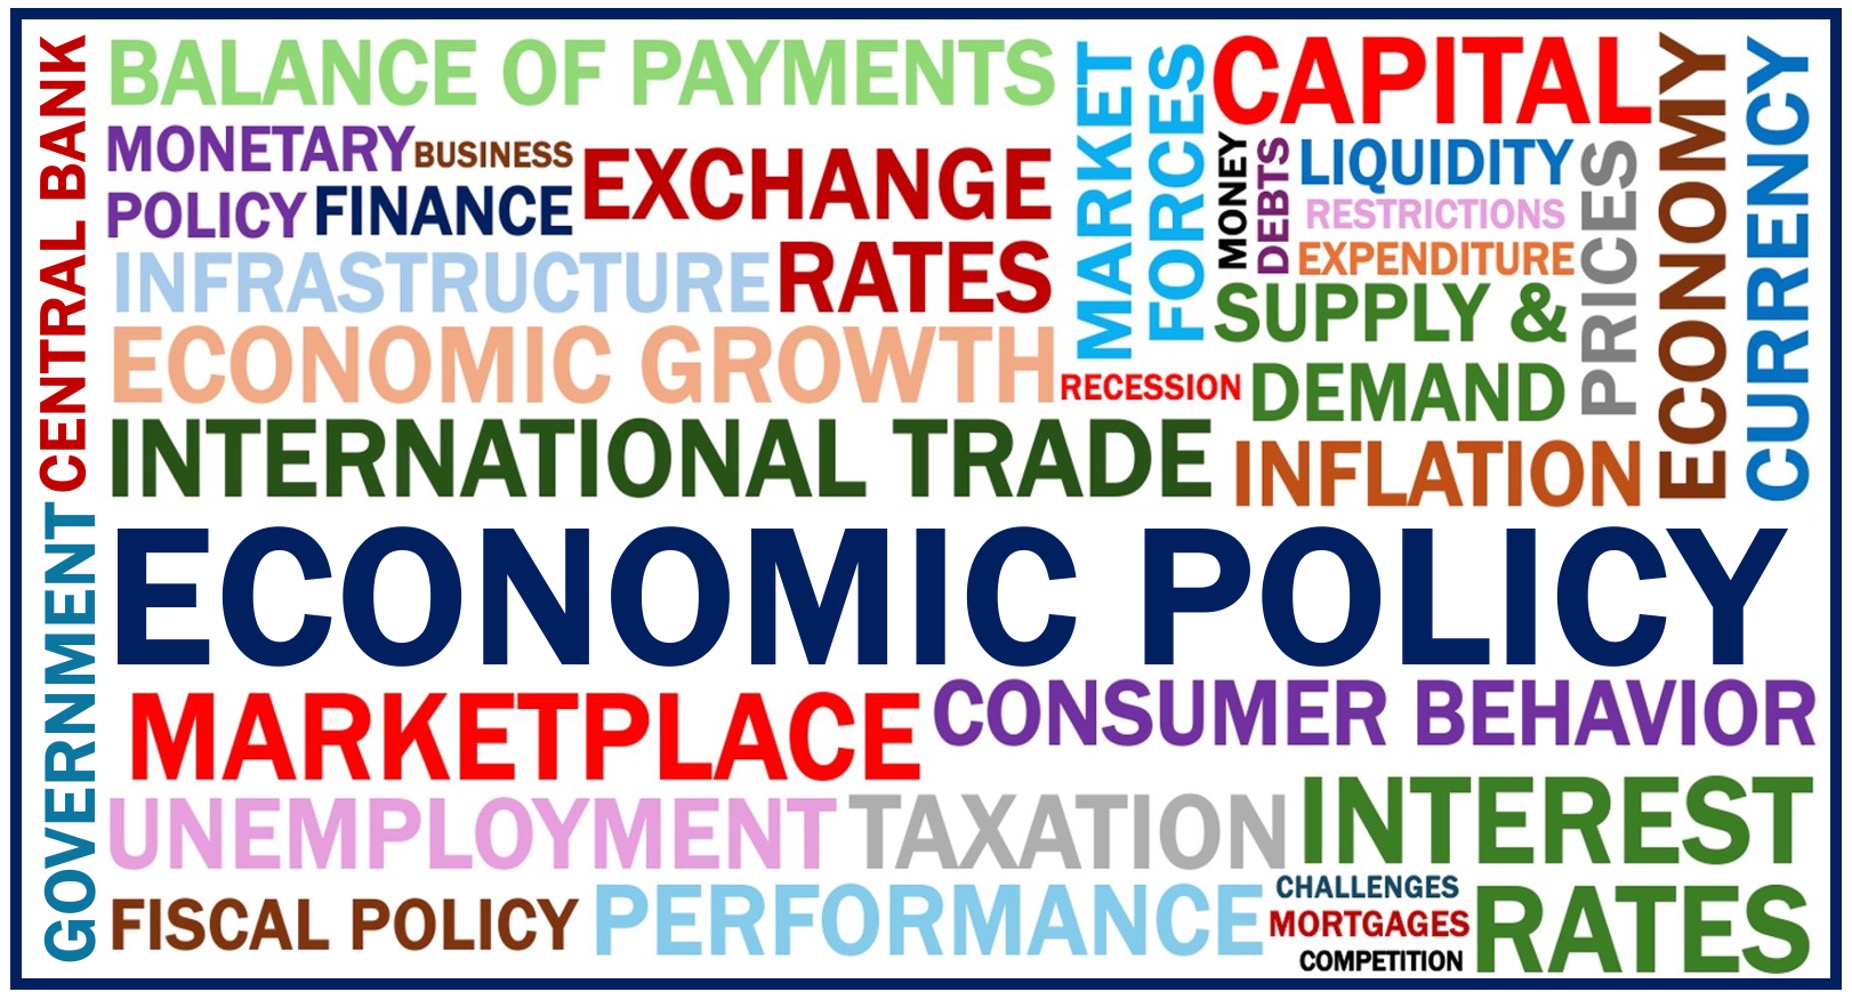 Word Jumble related to Economy Policy.